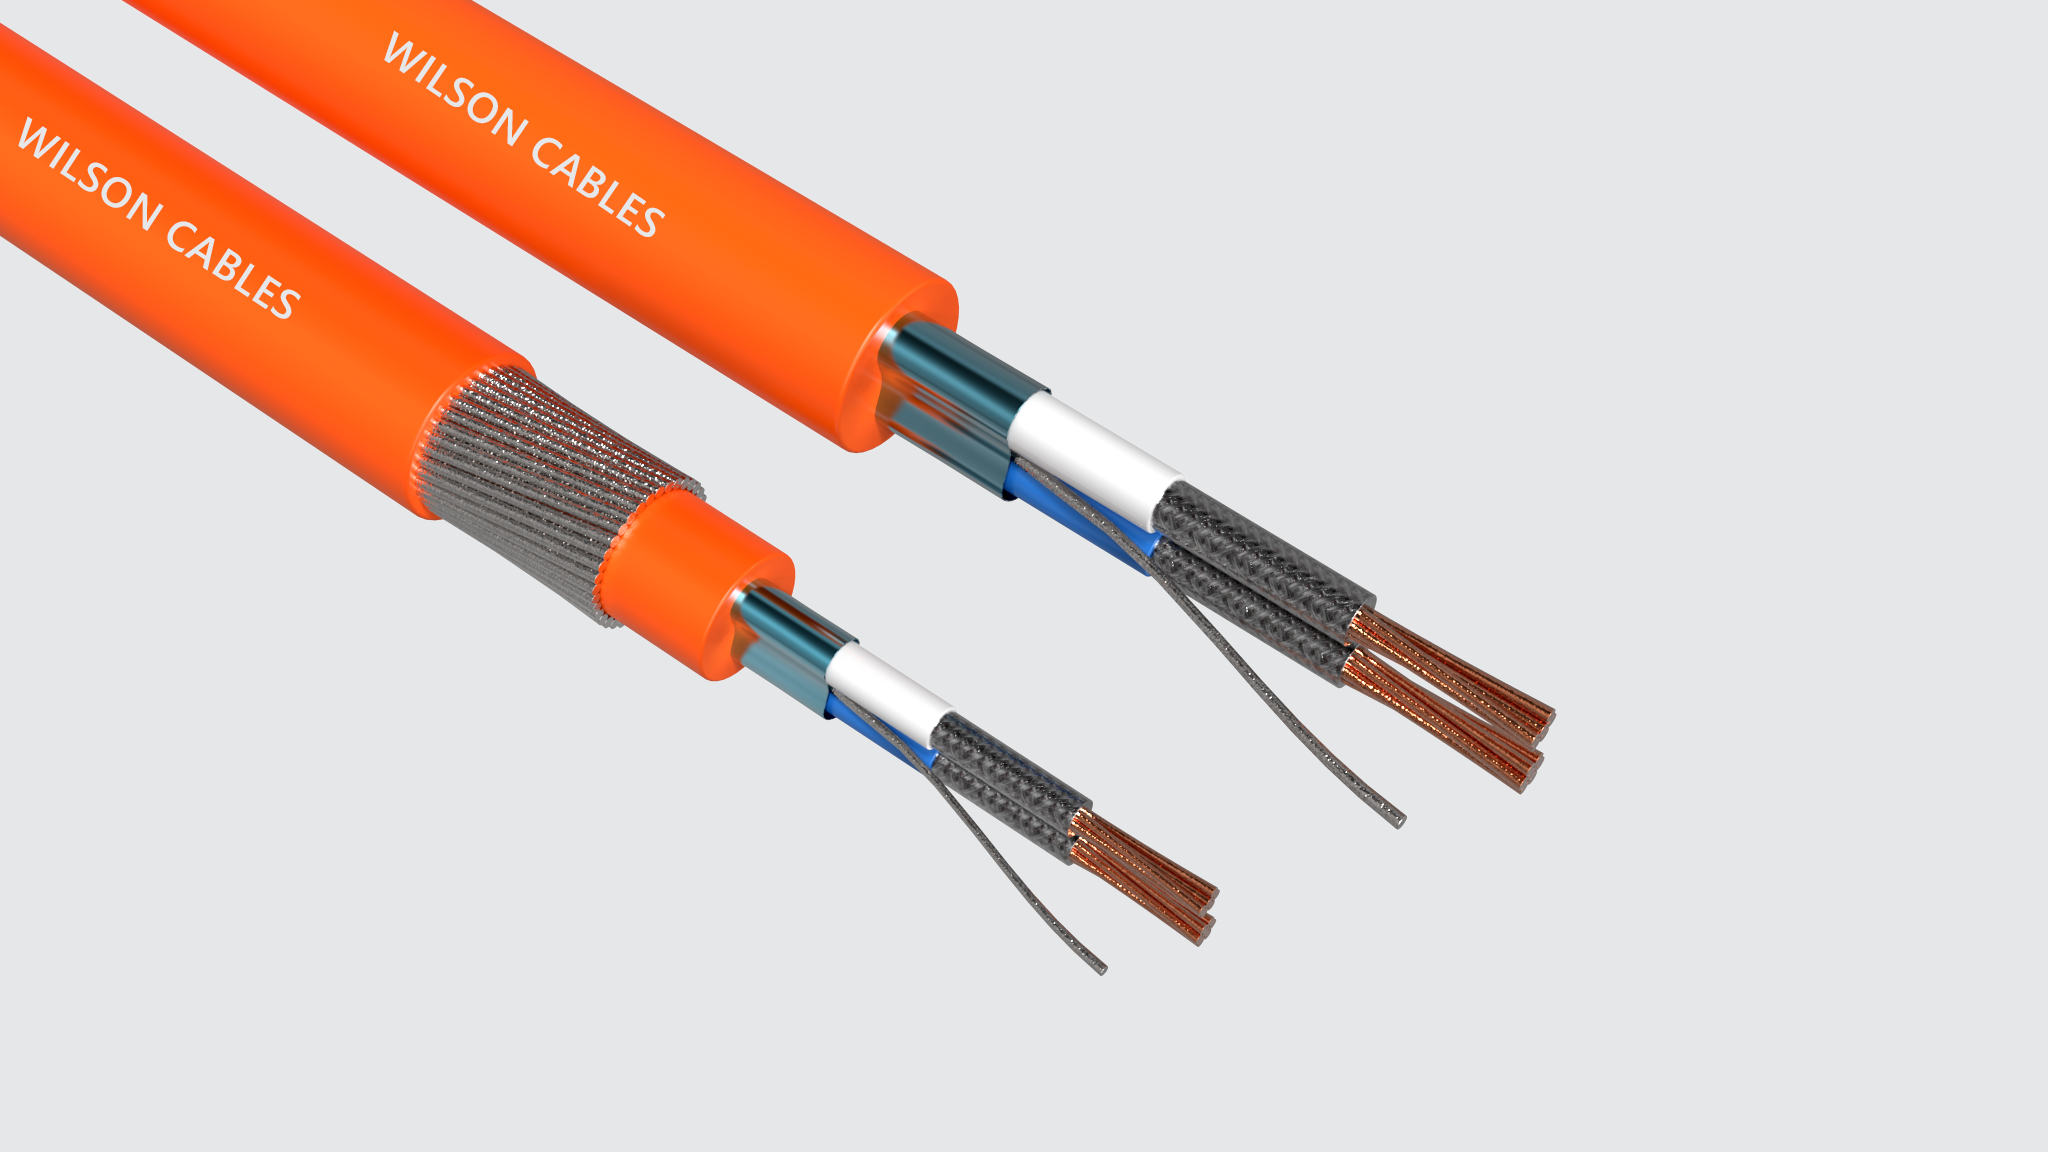 FRIC-300 & FRIC-300A Fire Resistant Instrumentation Cables